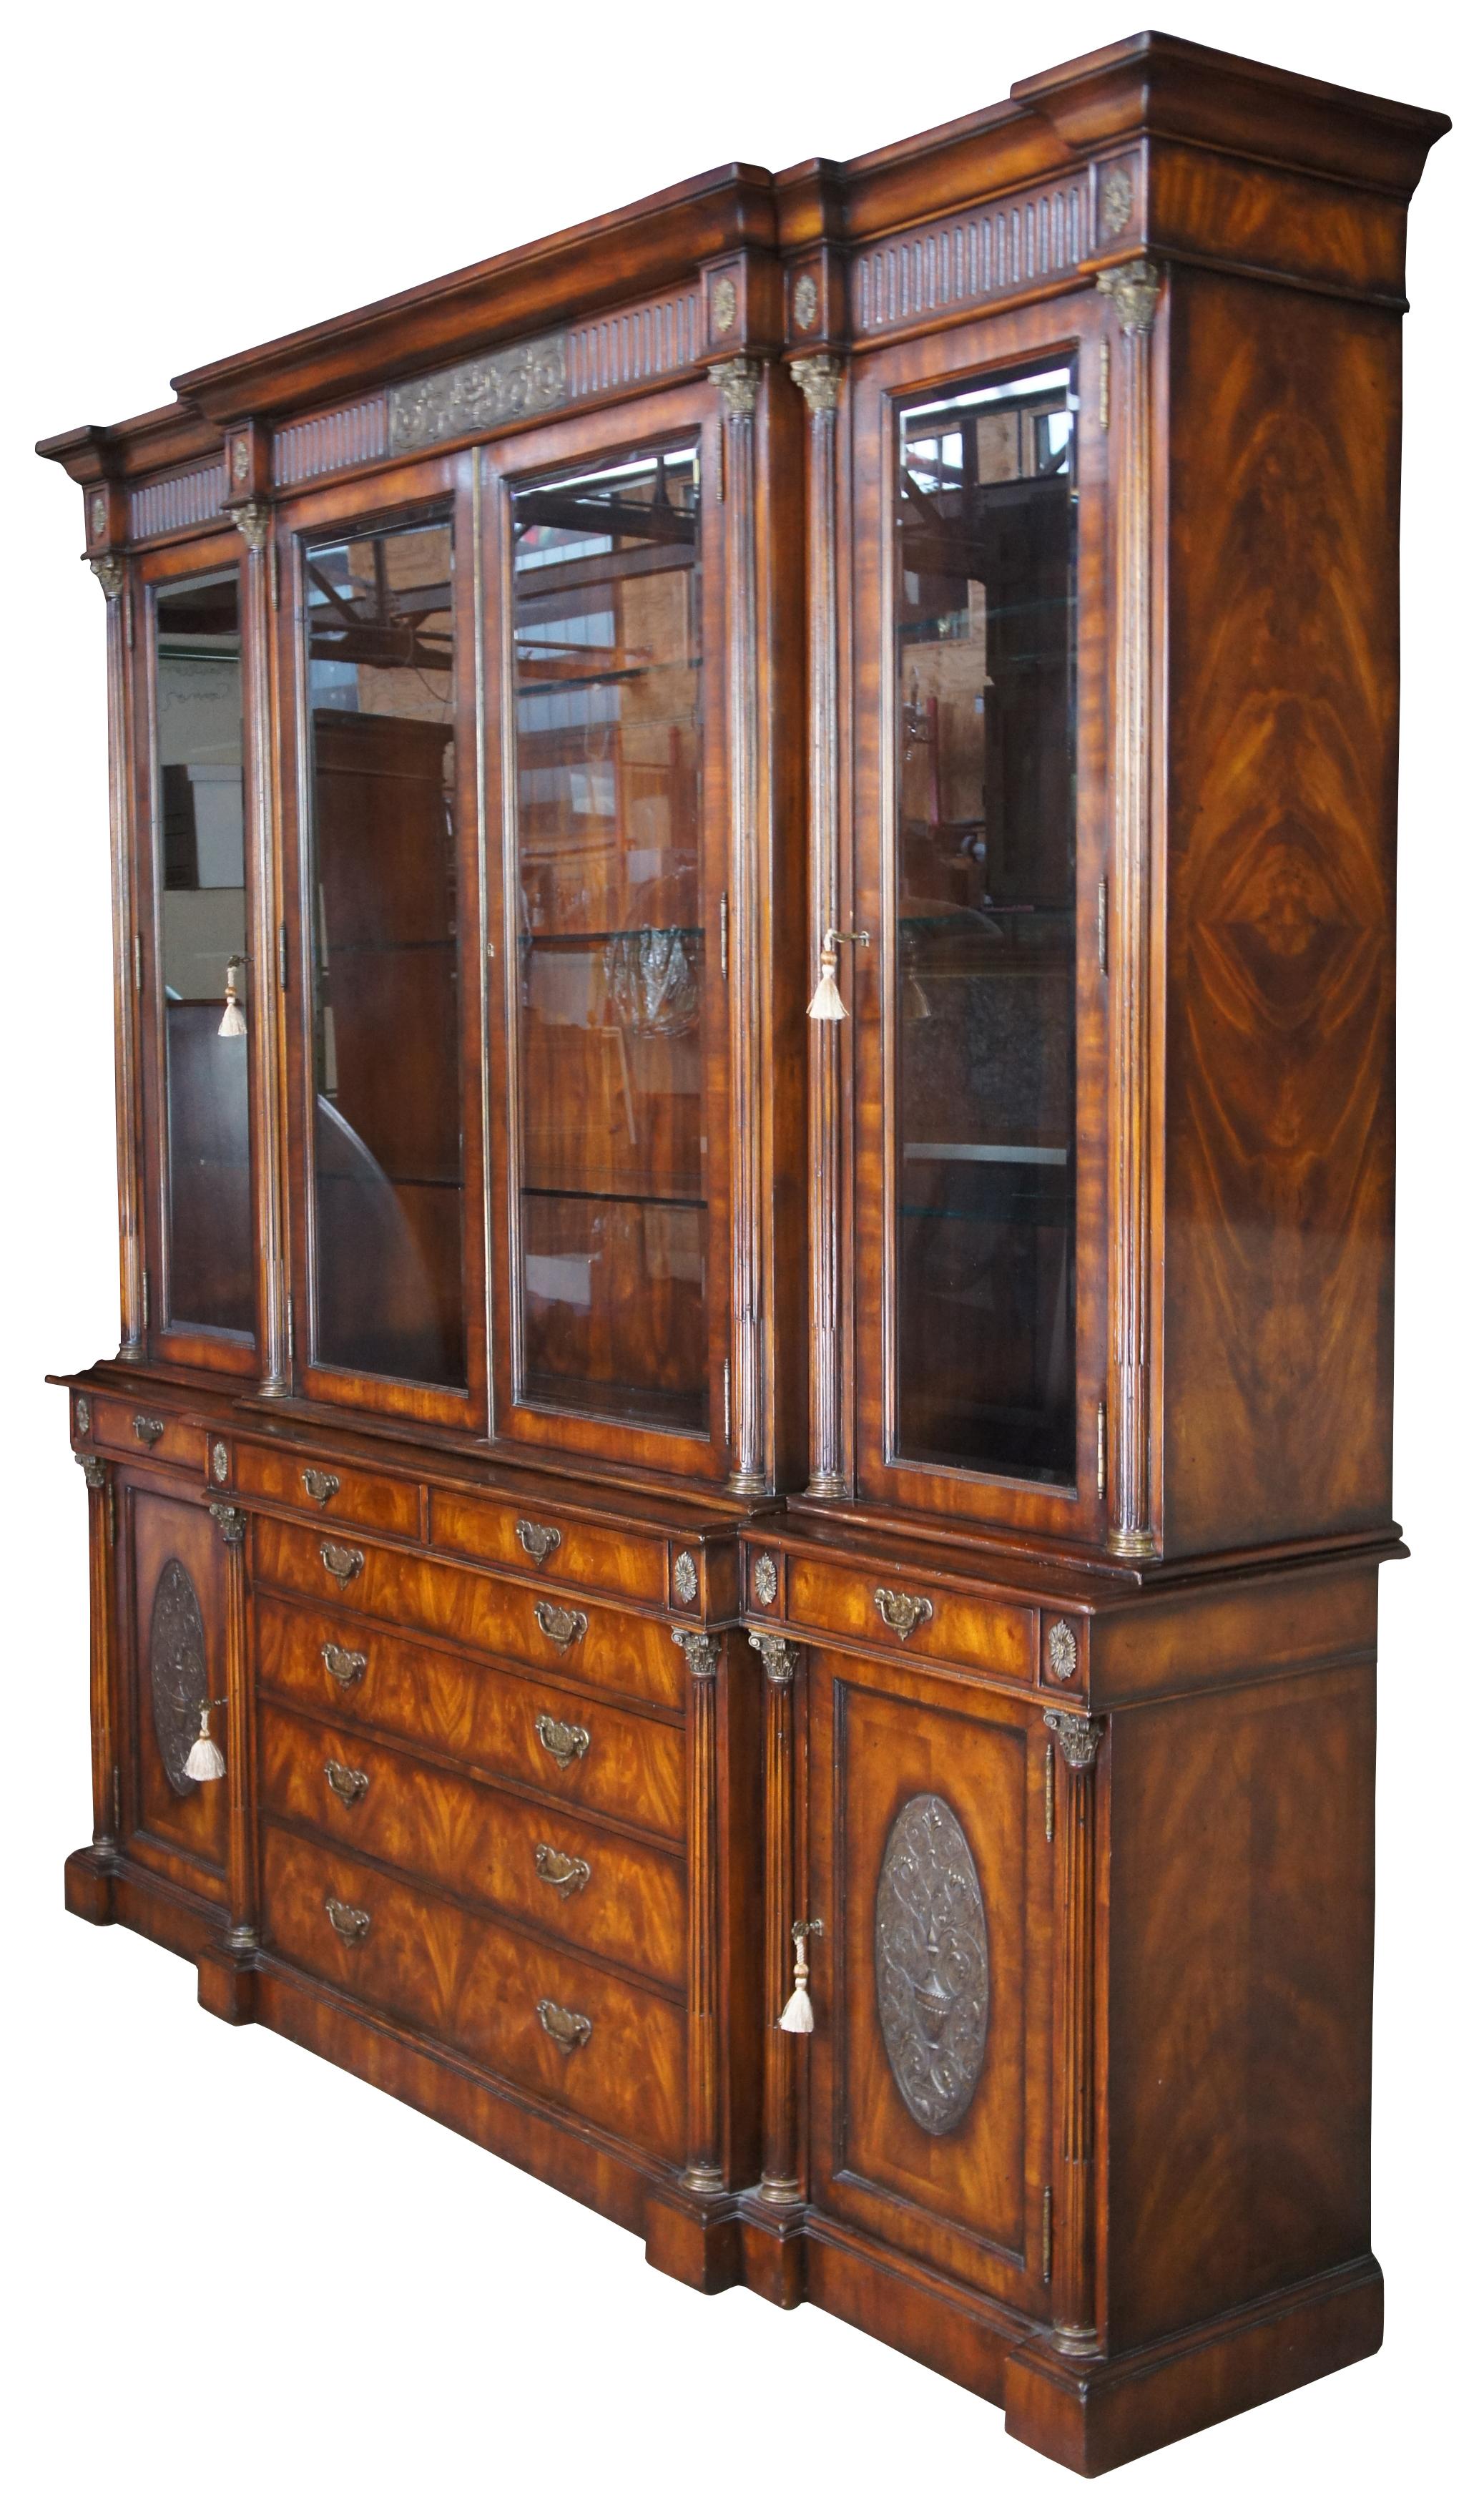 Monumental Regency/Neoclassical inspired breakfront by Theodore Alexander. Made from flame/ crotch mahogany with brass hardware. Features a doric crown with triglyph frieze over long carved columns, intricate capitals, medallions and low relief